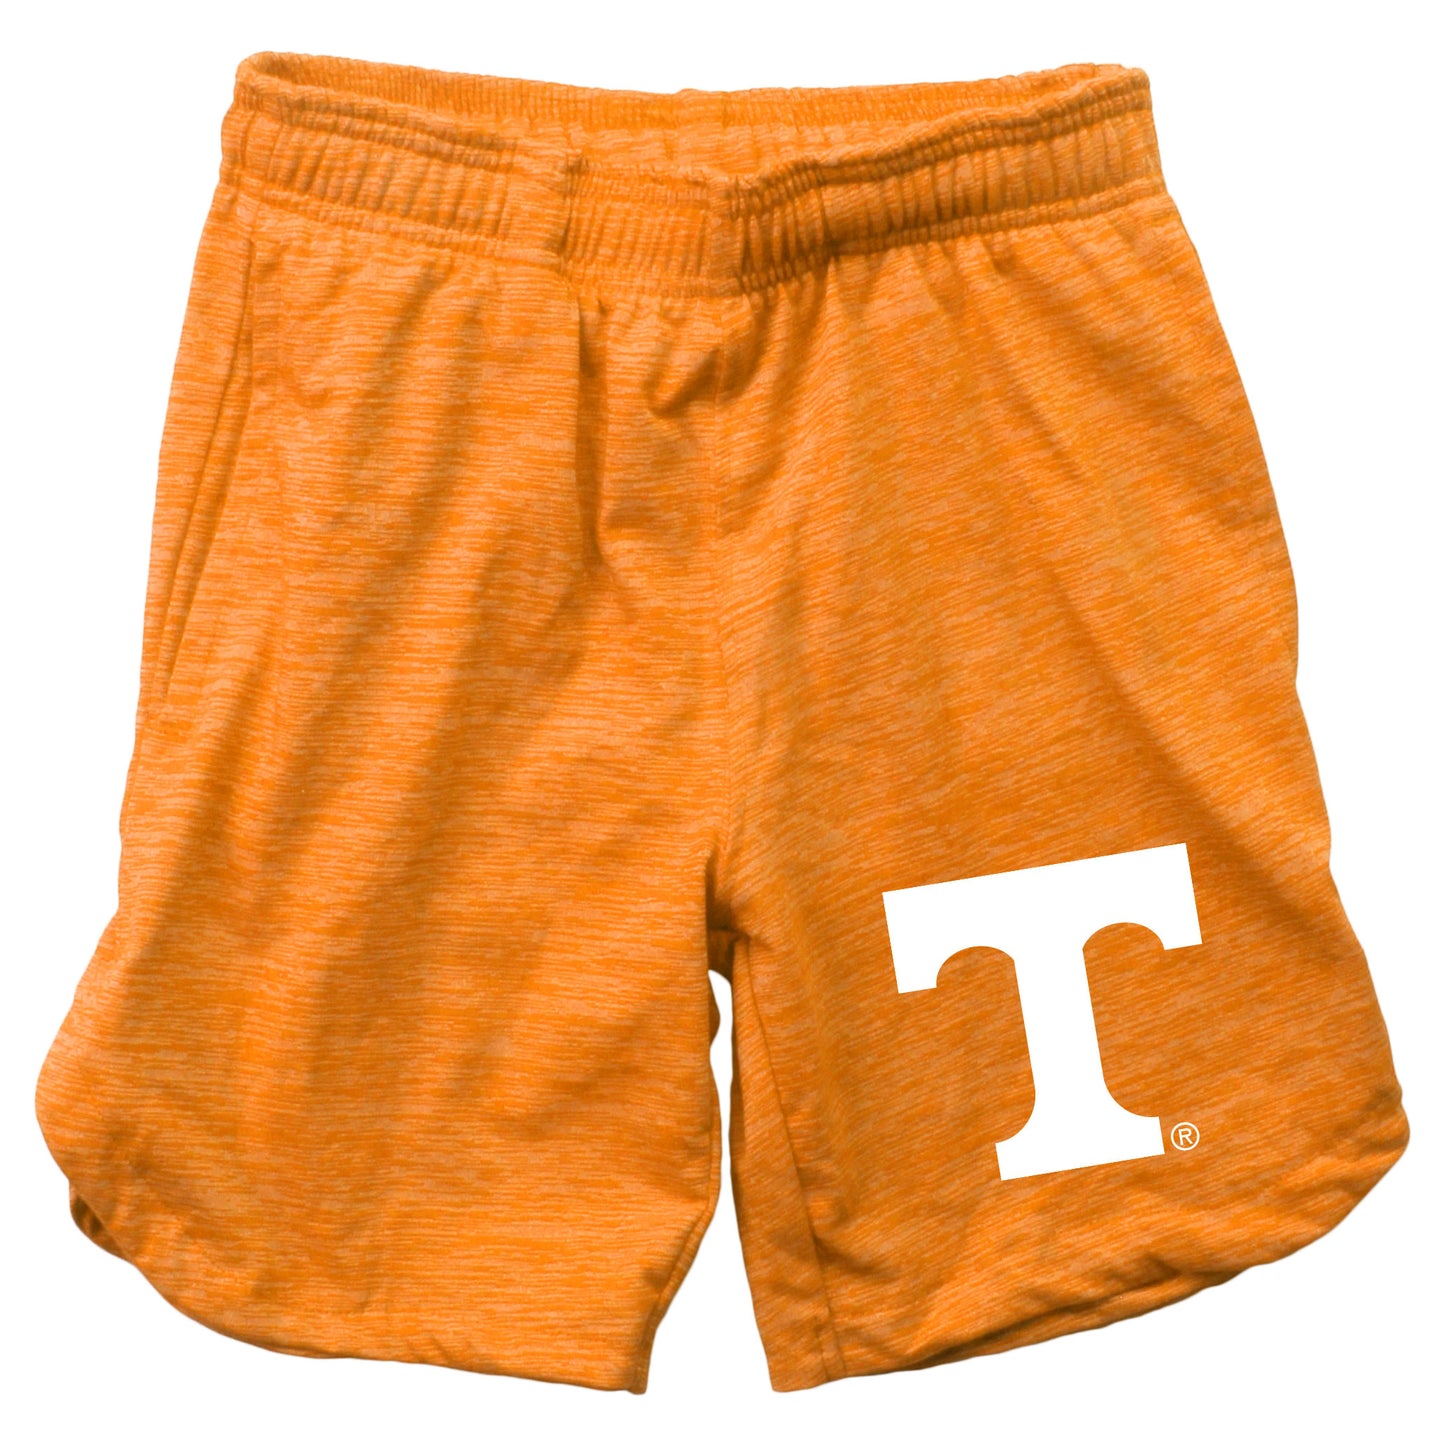 Tennessee Volunteers Youth Boys Wes and Willy Cloudy Yarn Shorts